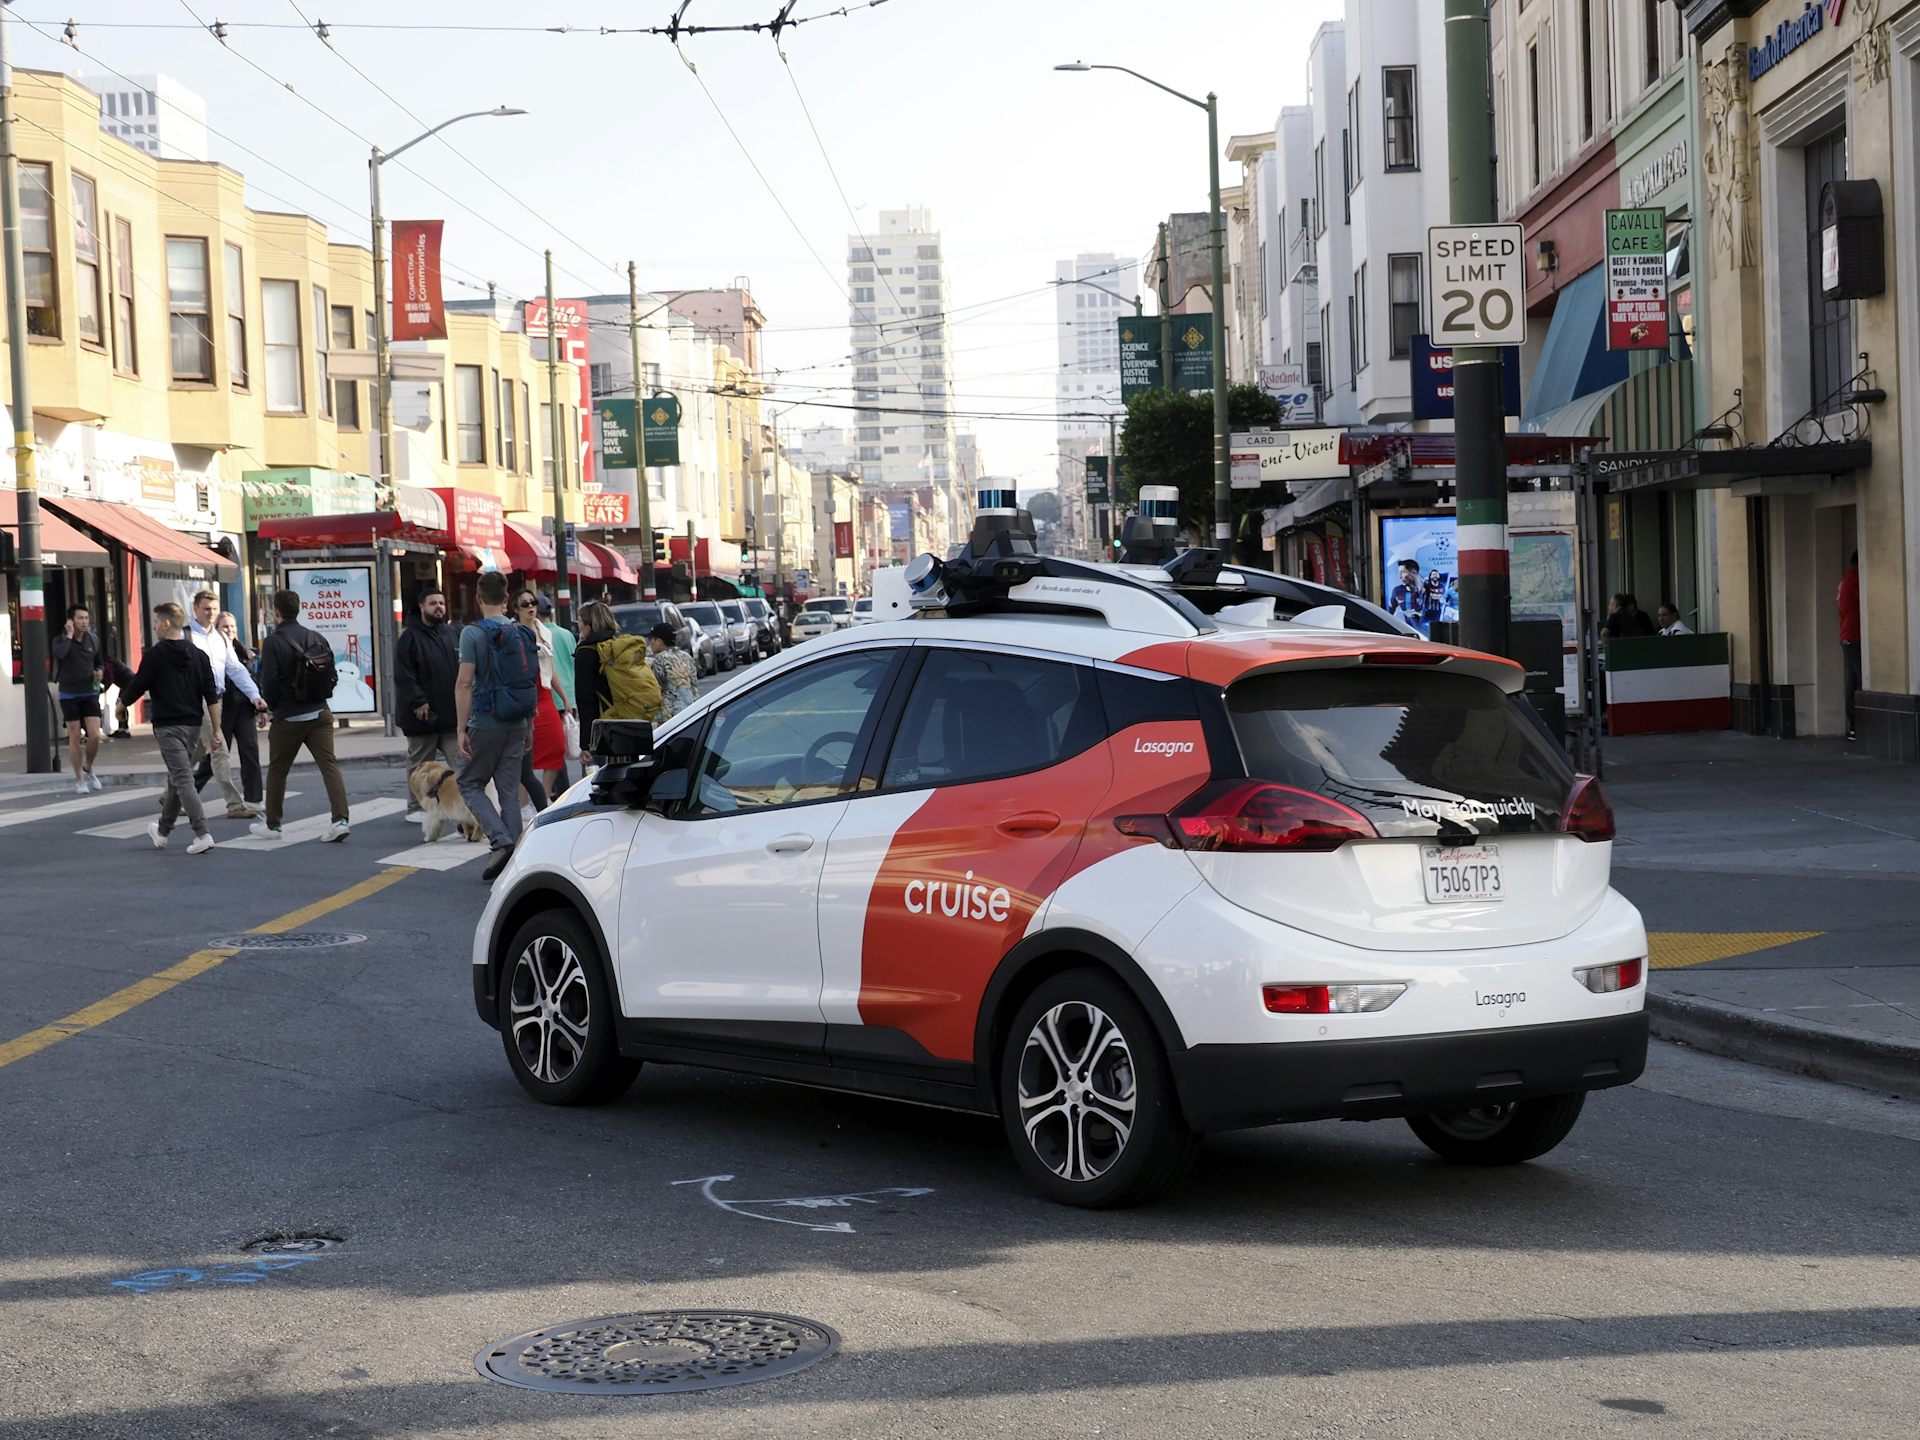 Australians Embrace Self-Driving Vehicles, But Insist on Human Control as the Final Authority